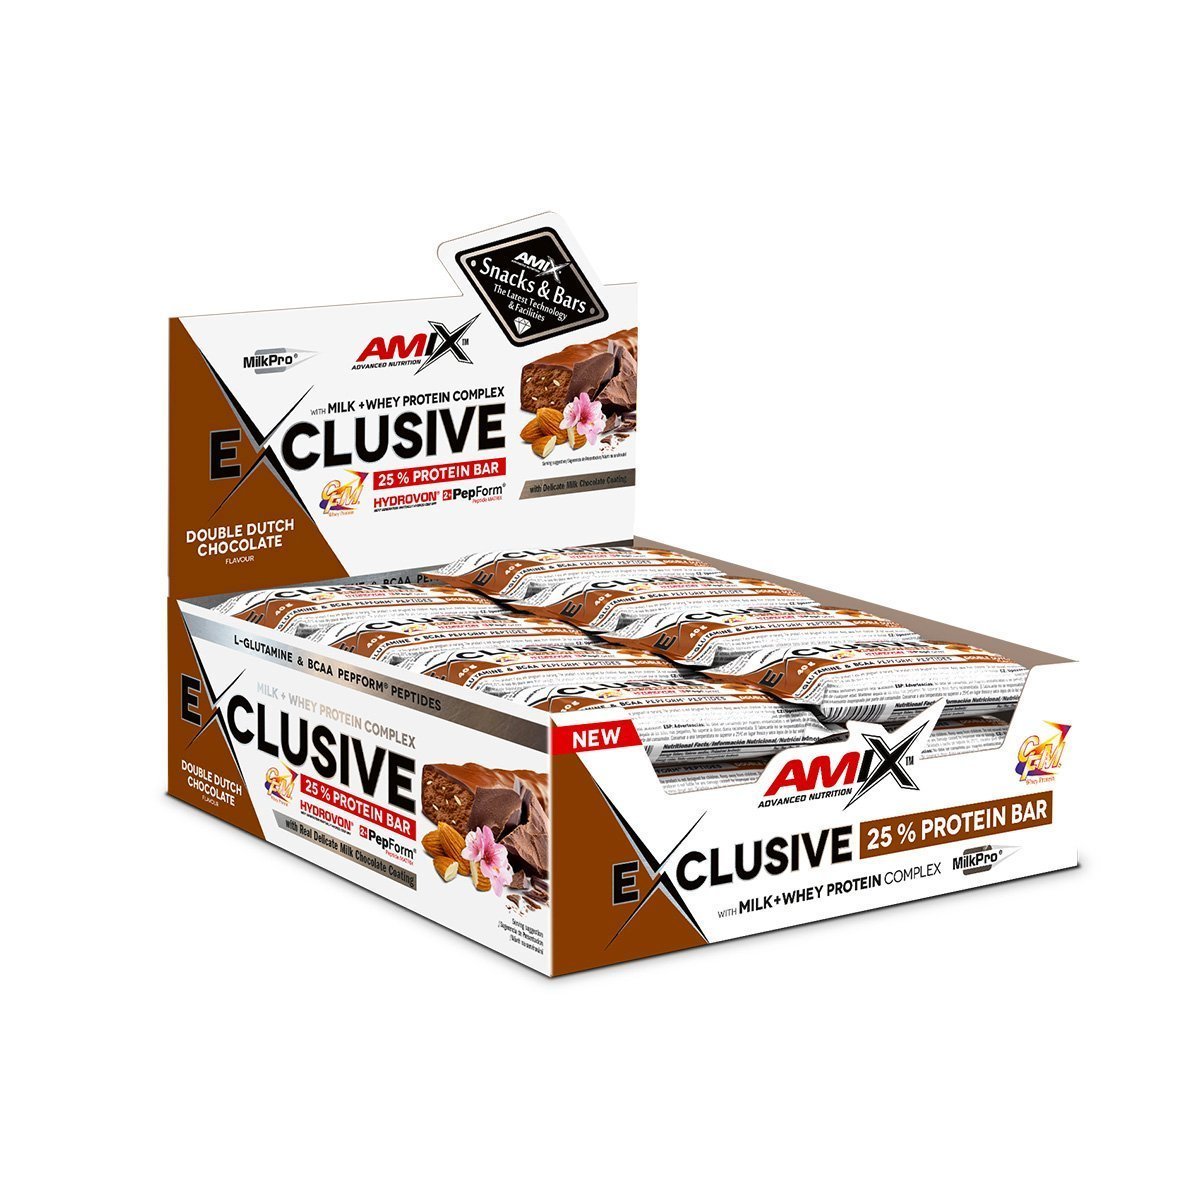 Amix Exclusive Protein Bar - 24x40g - Double Dutch Chocolate